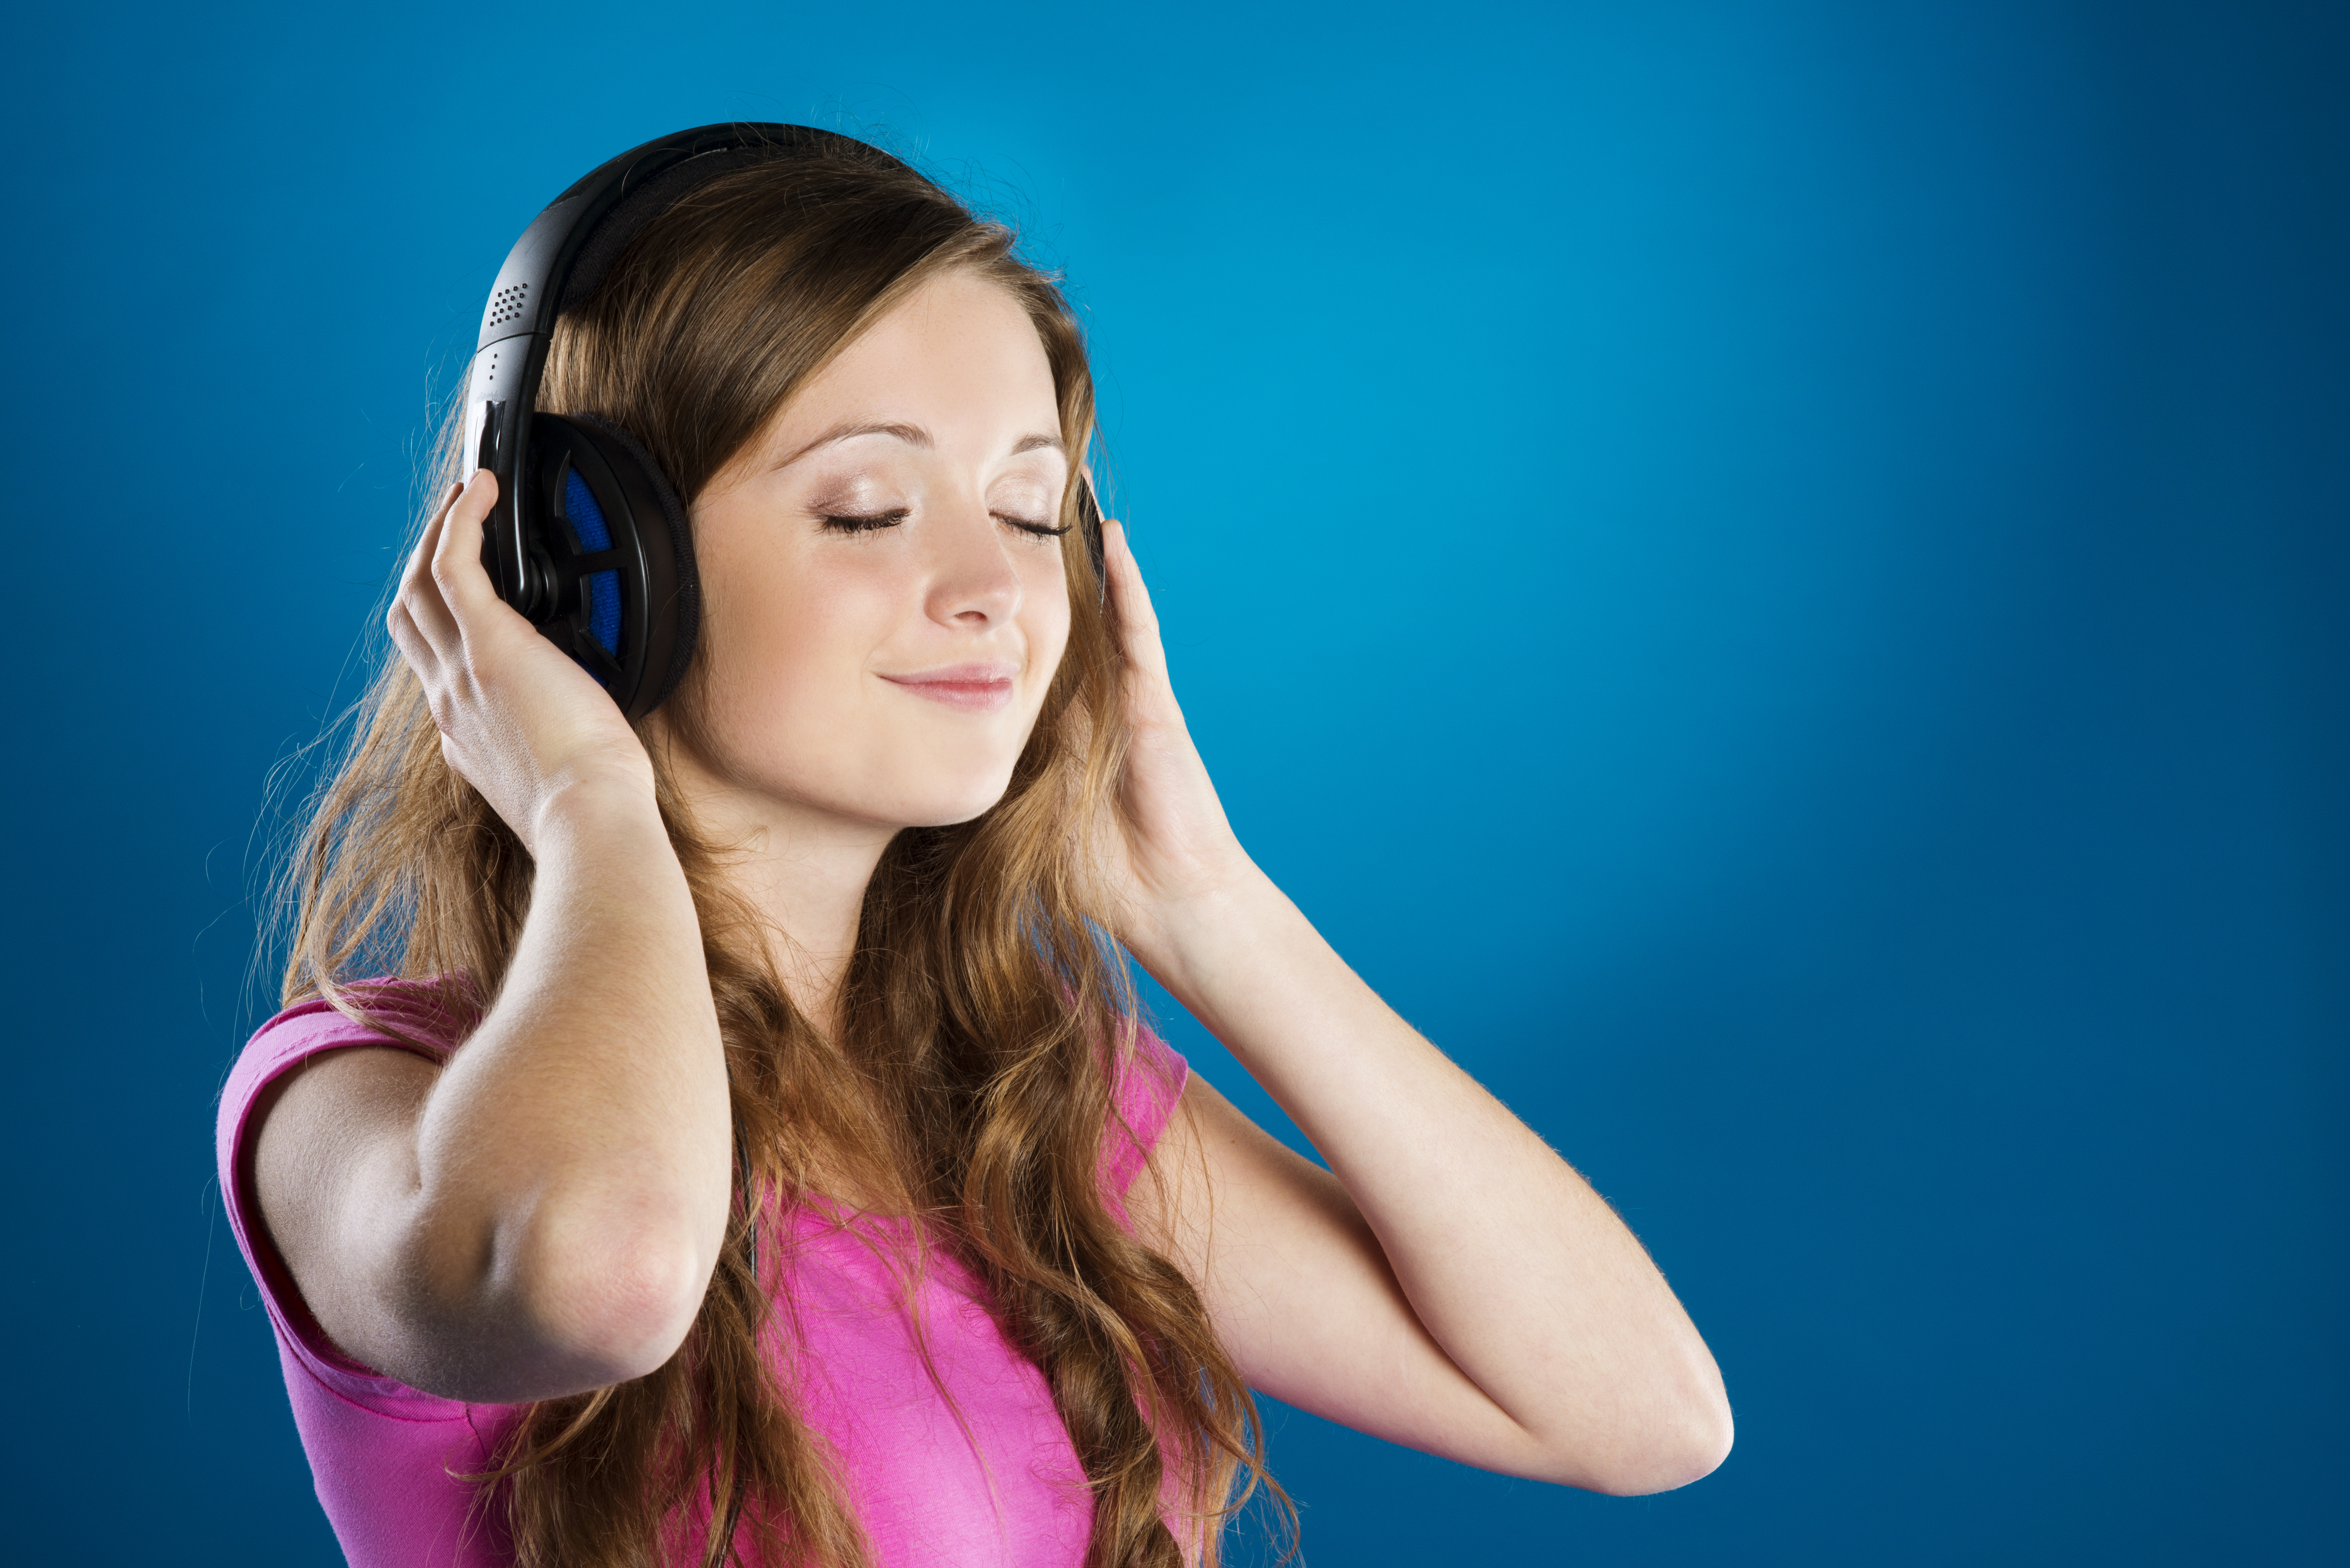 graphicstock-attractive-teenage-girl-with-headphones-on-blue-background-she-is-listening-music_S0Q00xB3Z-.jpg